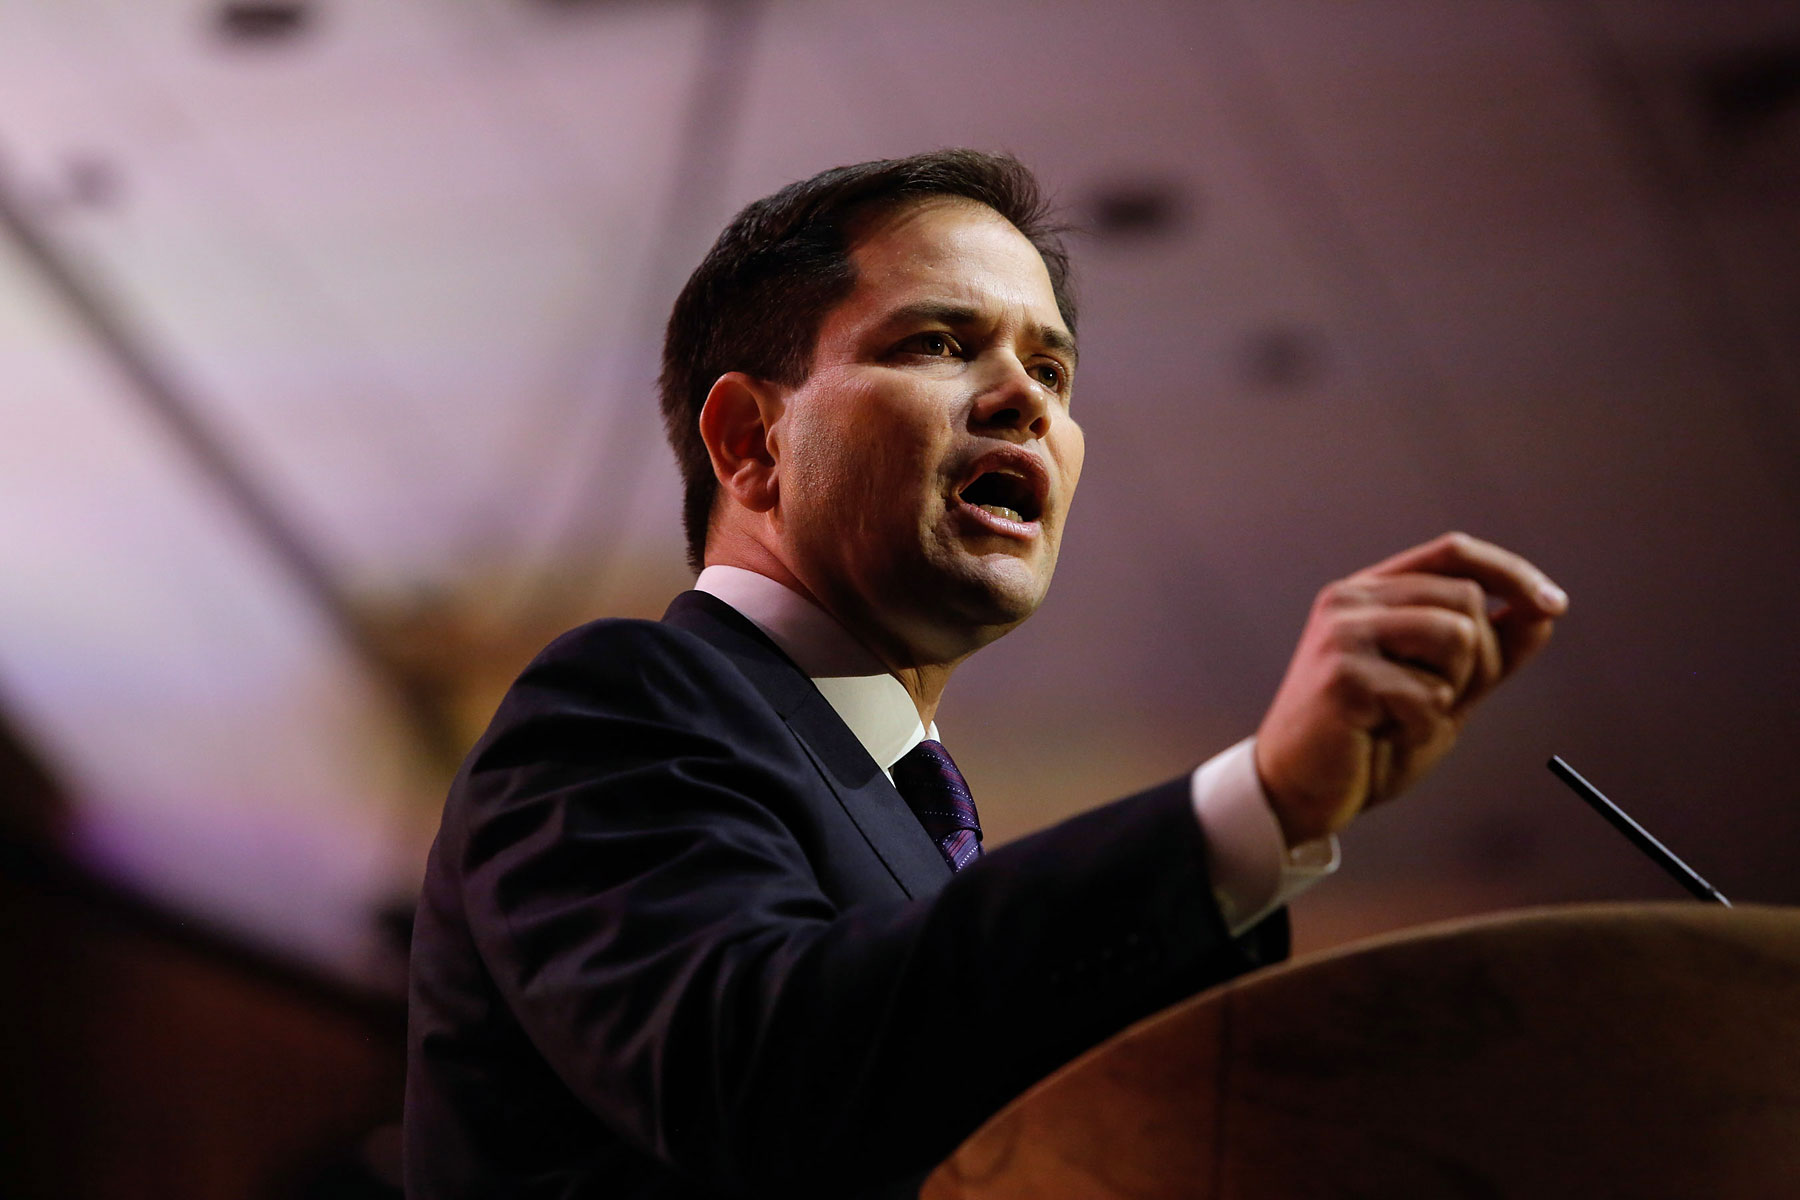 The Texas state flag stands behind Senator Marco Rubio, a 